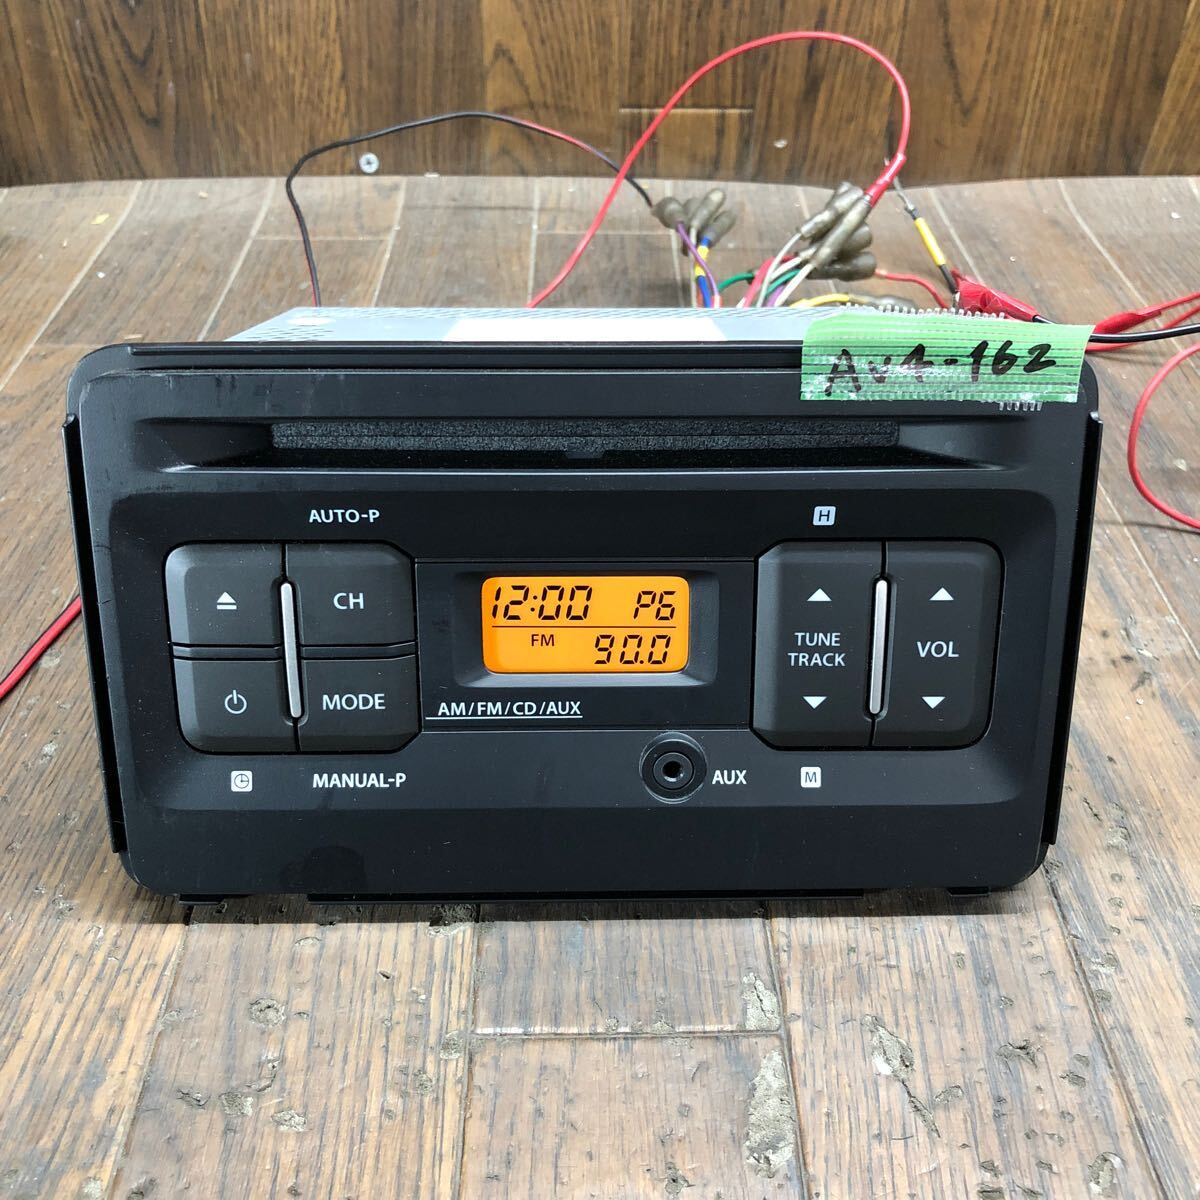 AV4-162 super-discount car stereo CD player SUZUKI clarion PS-3567 39101-63R00 CD FM/AM AUX body only simple operation verification ending used present condition goods 